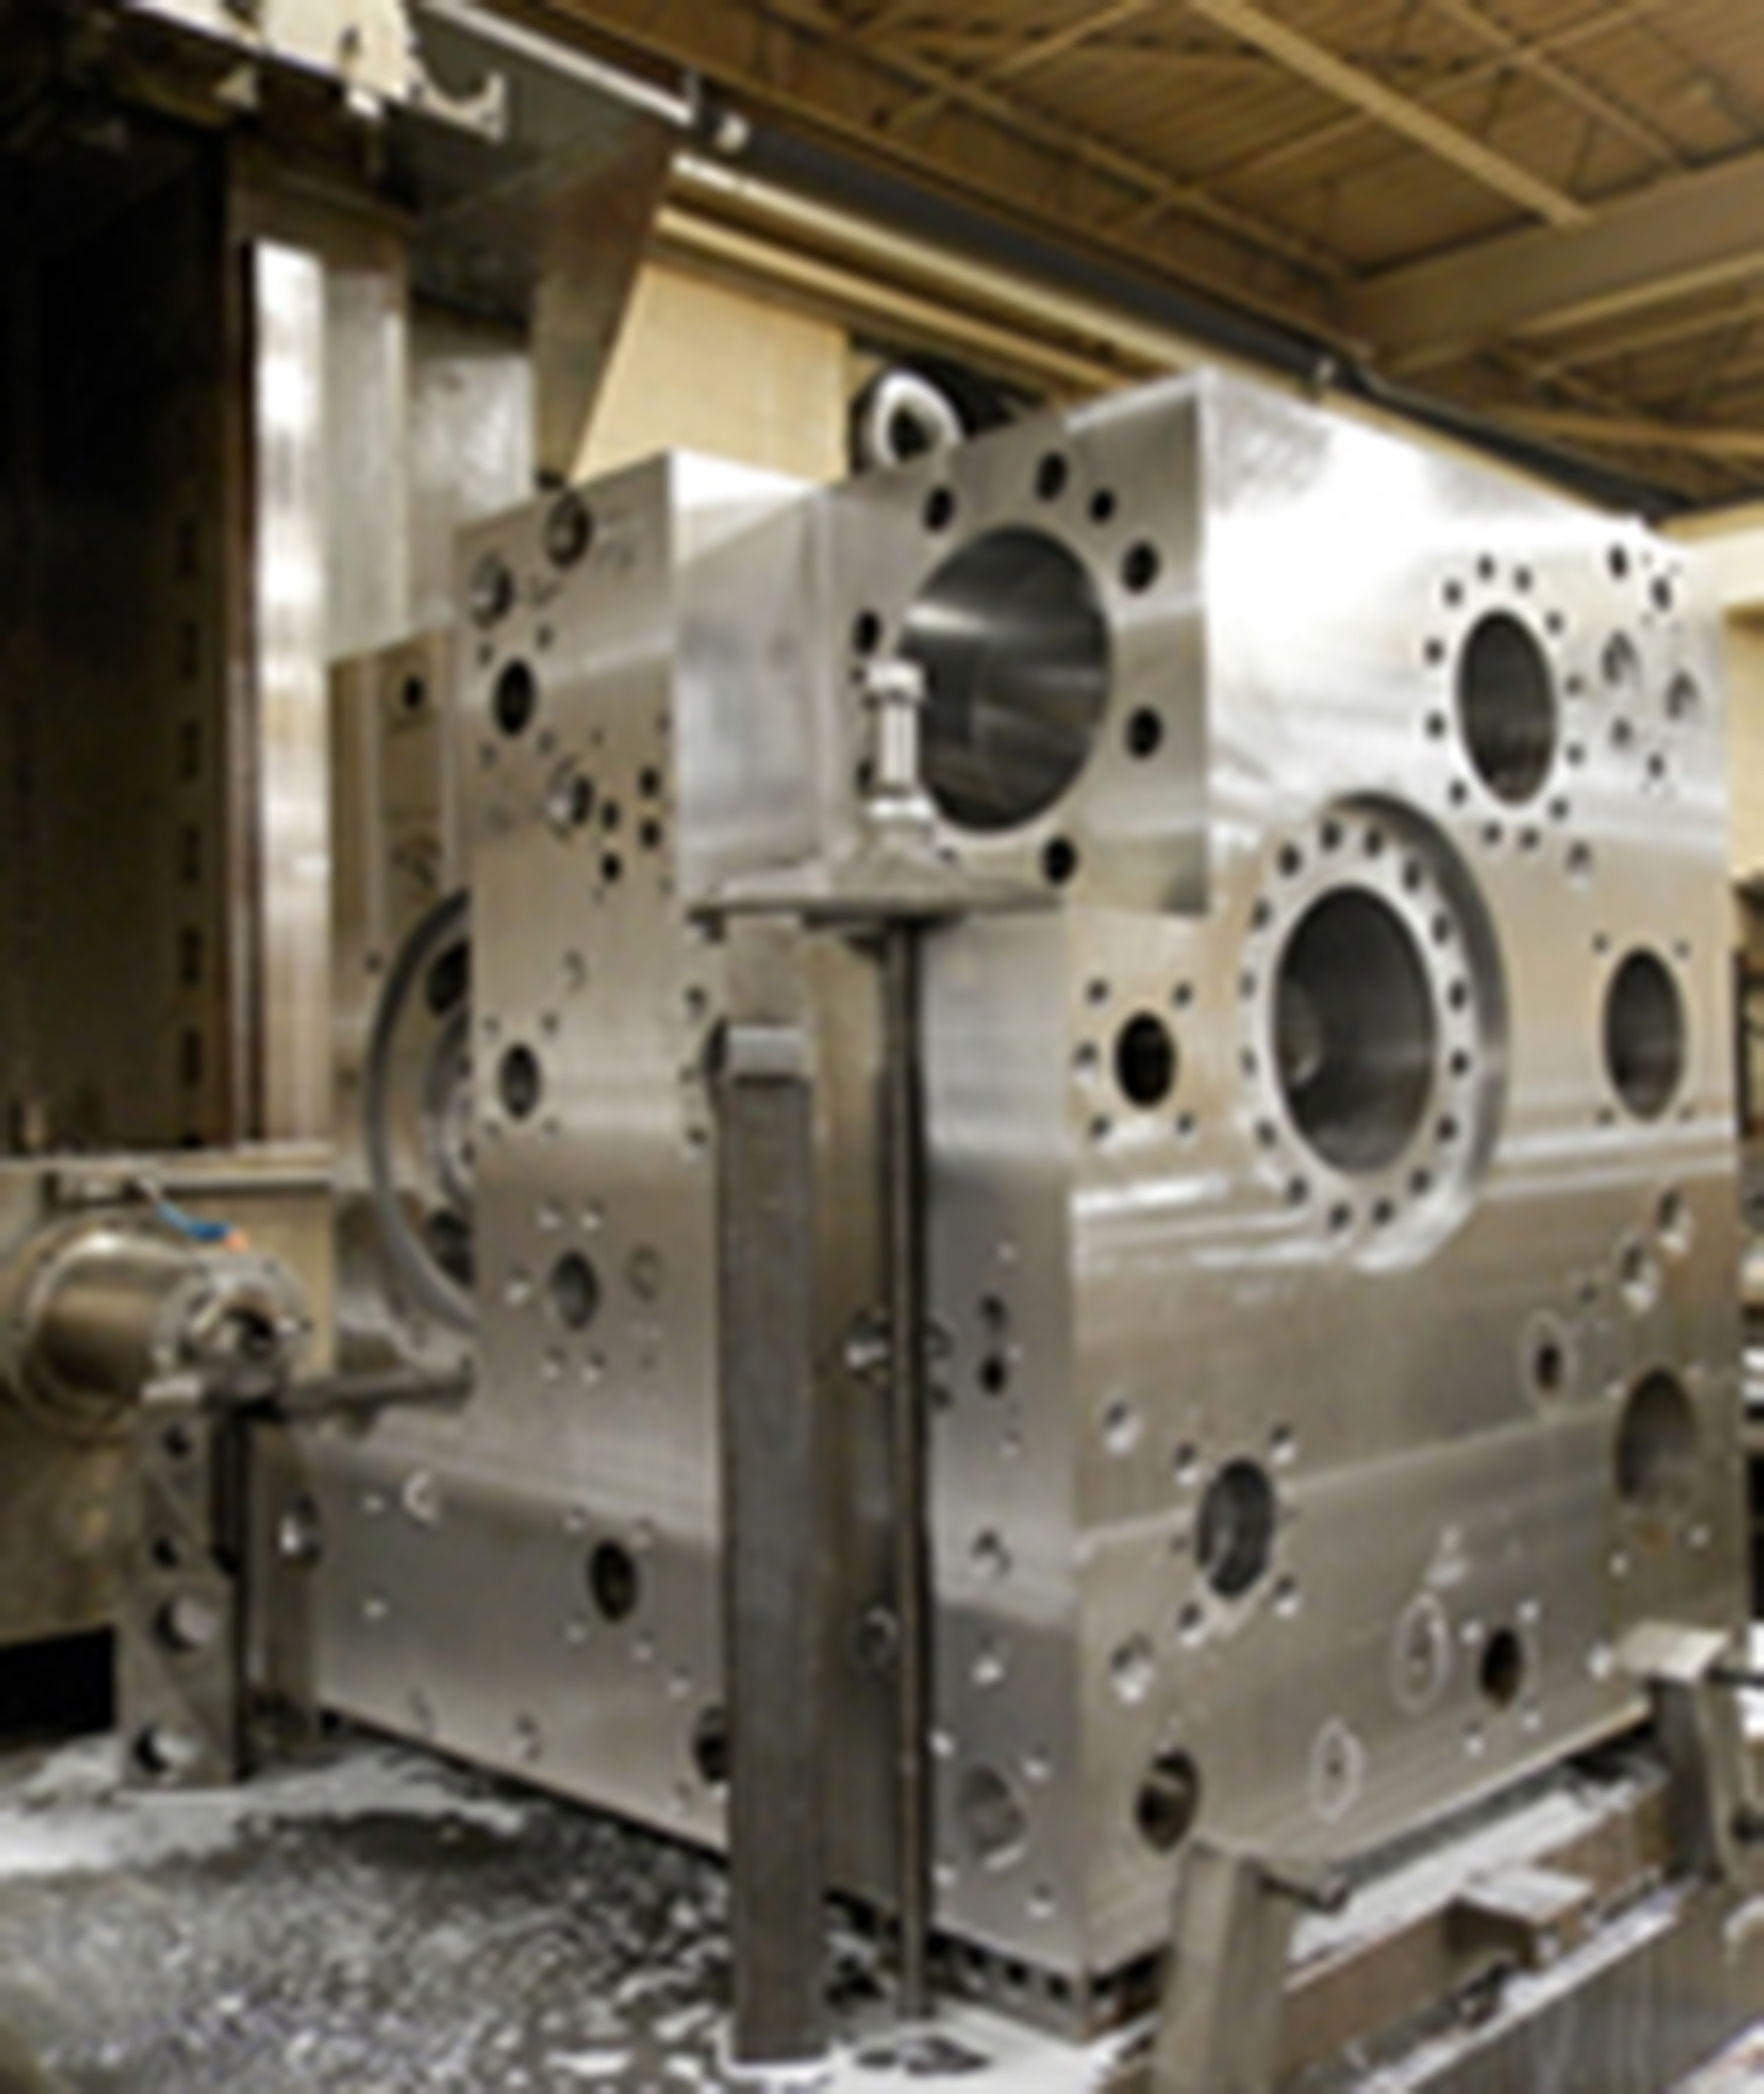 Hydraulic Manifold Manufacturing & Design Services